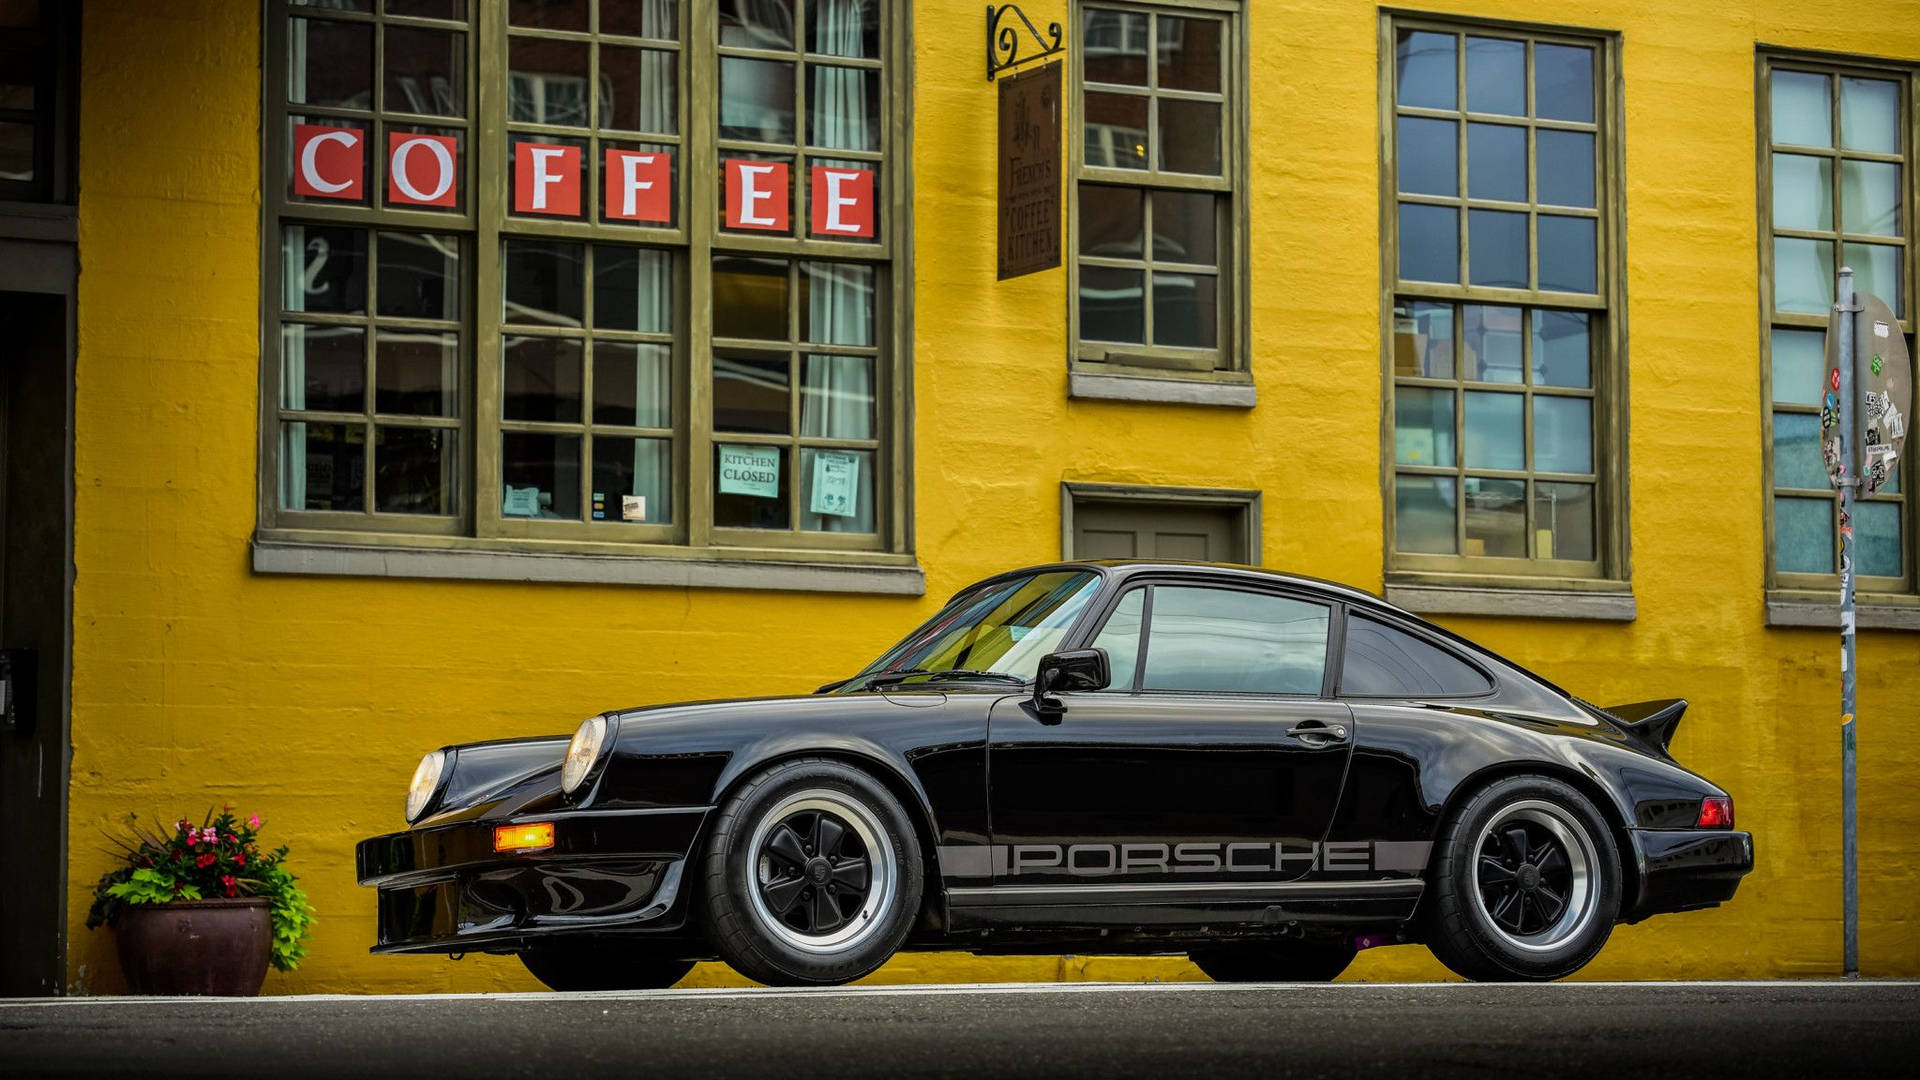 Porsche 911 And Coffee House Background